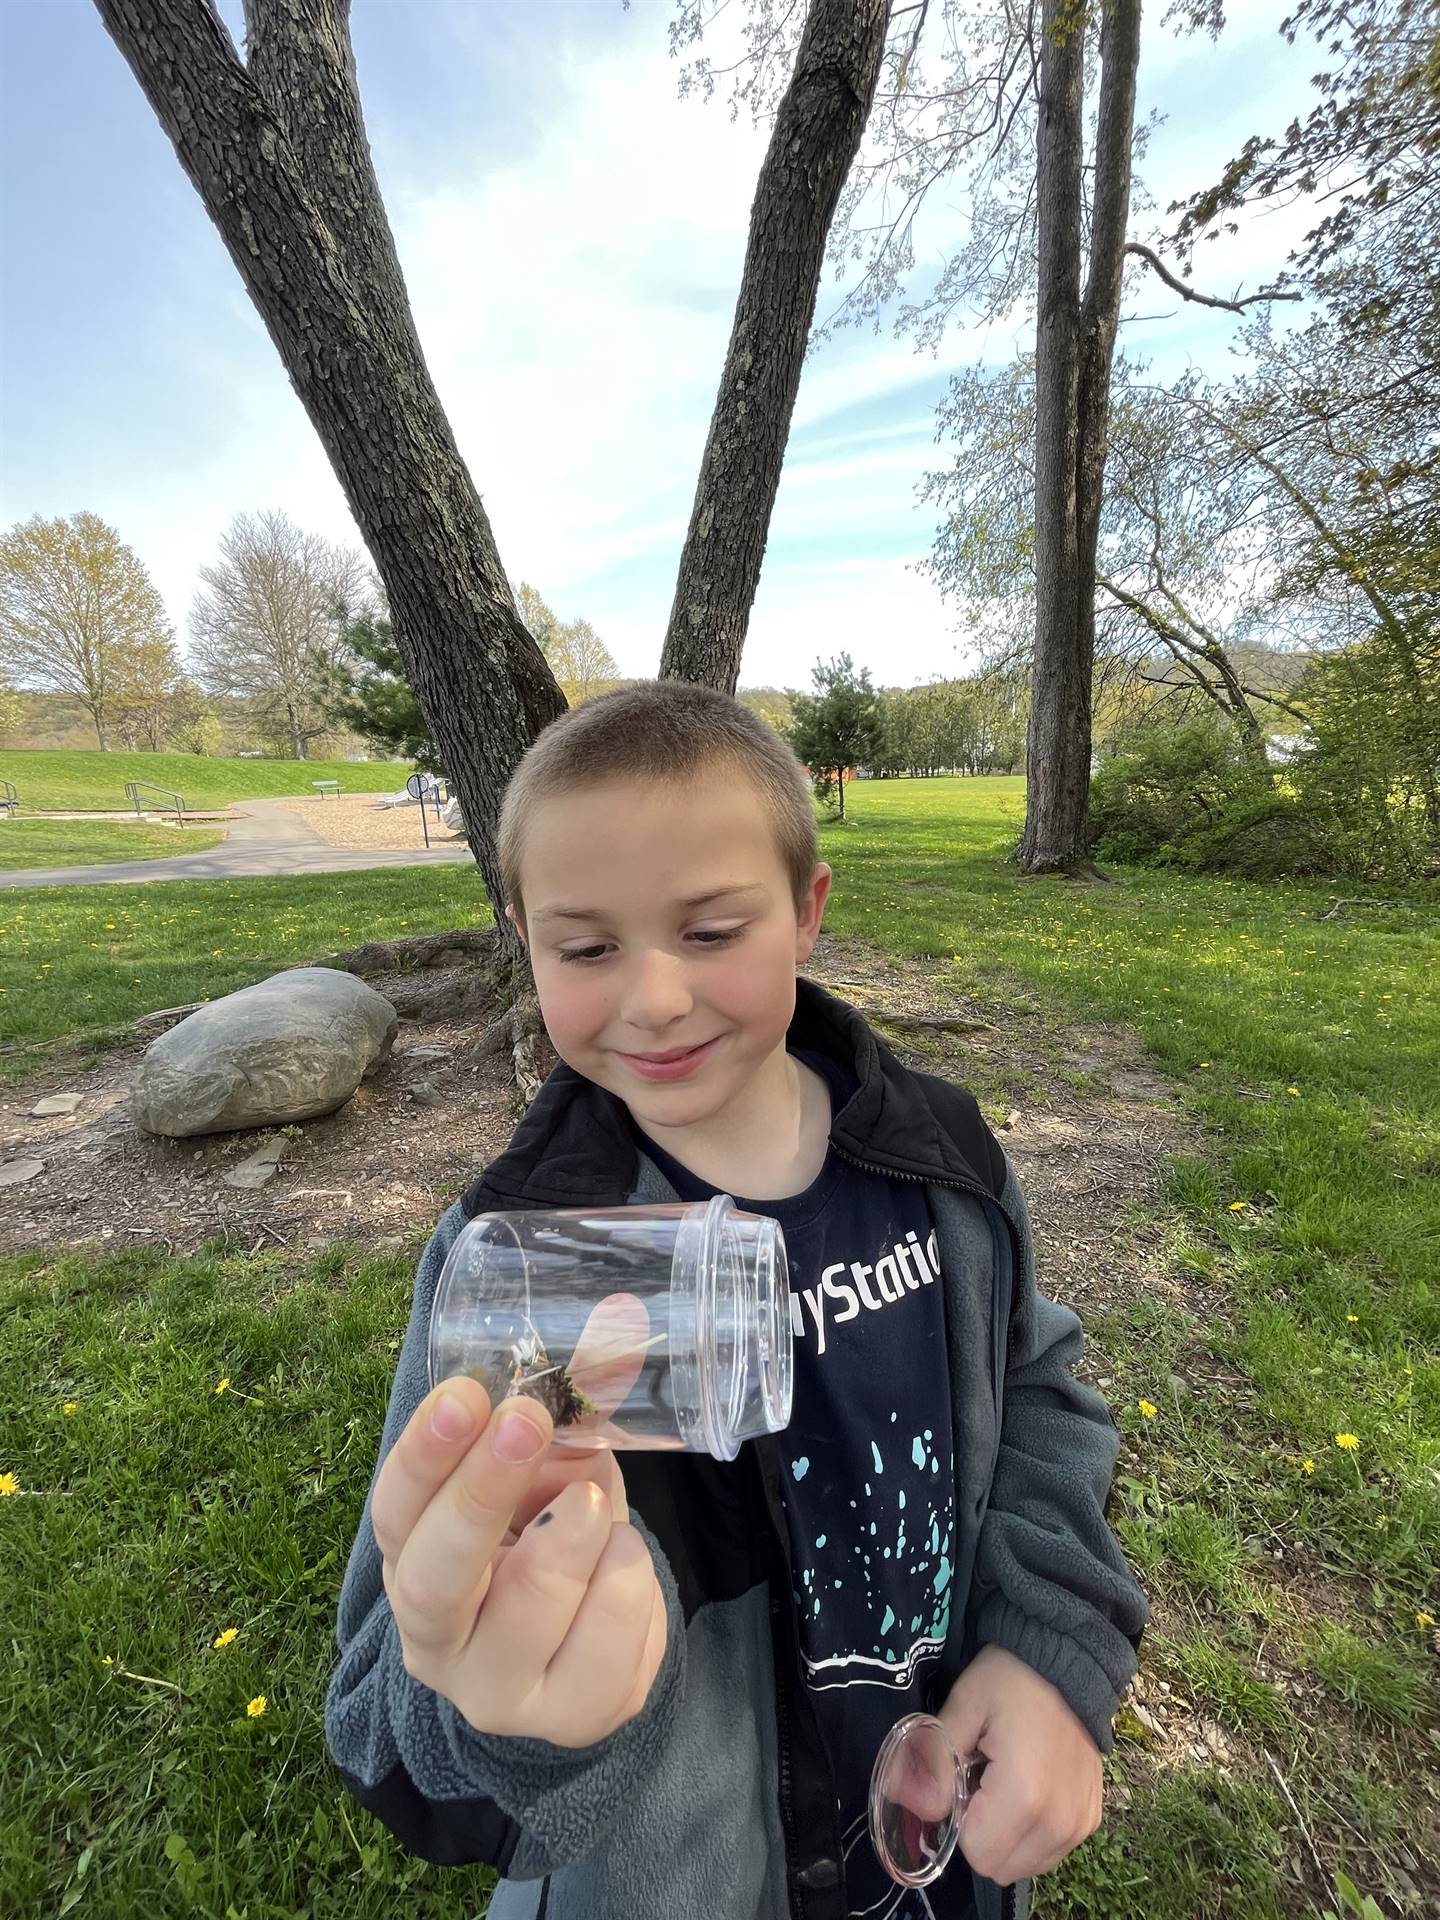 a student holds up a jar of nature items